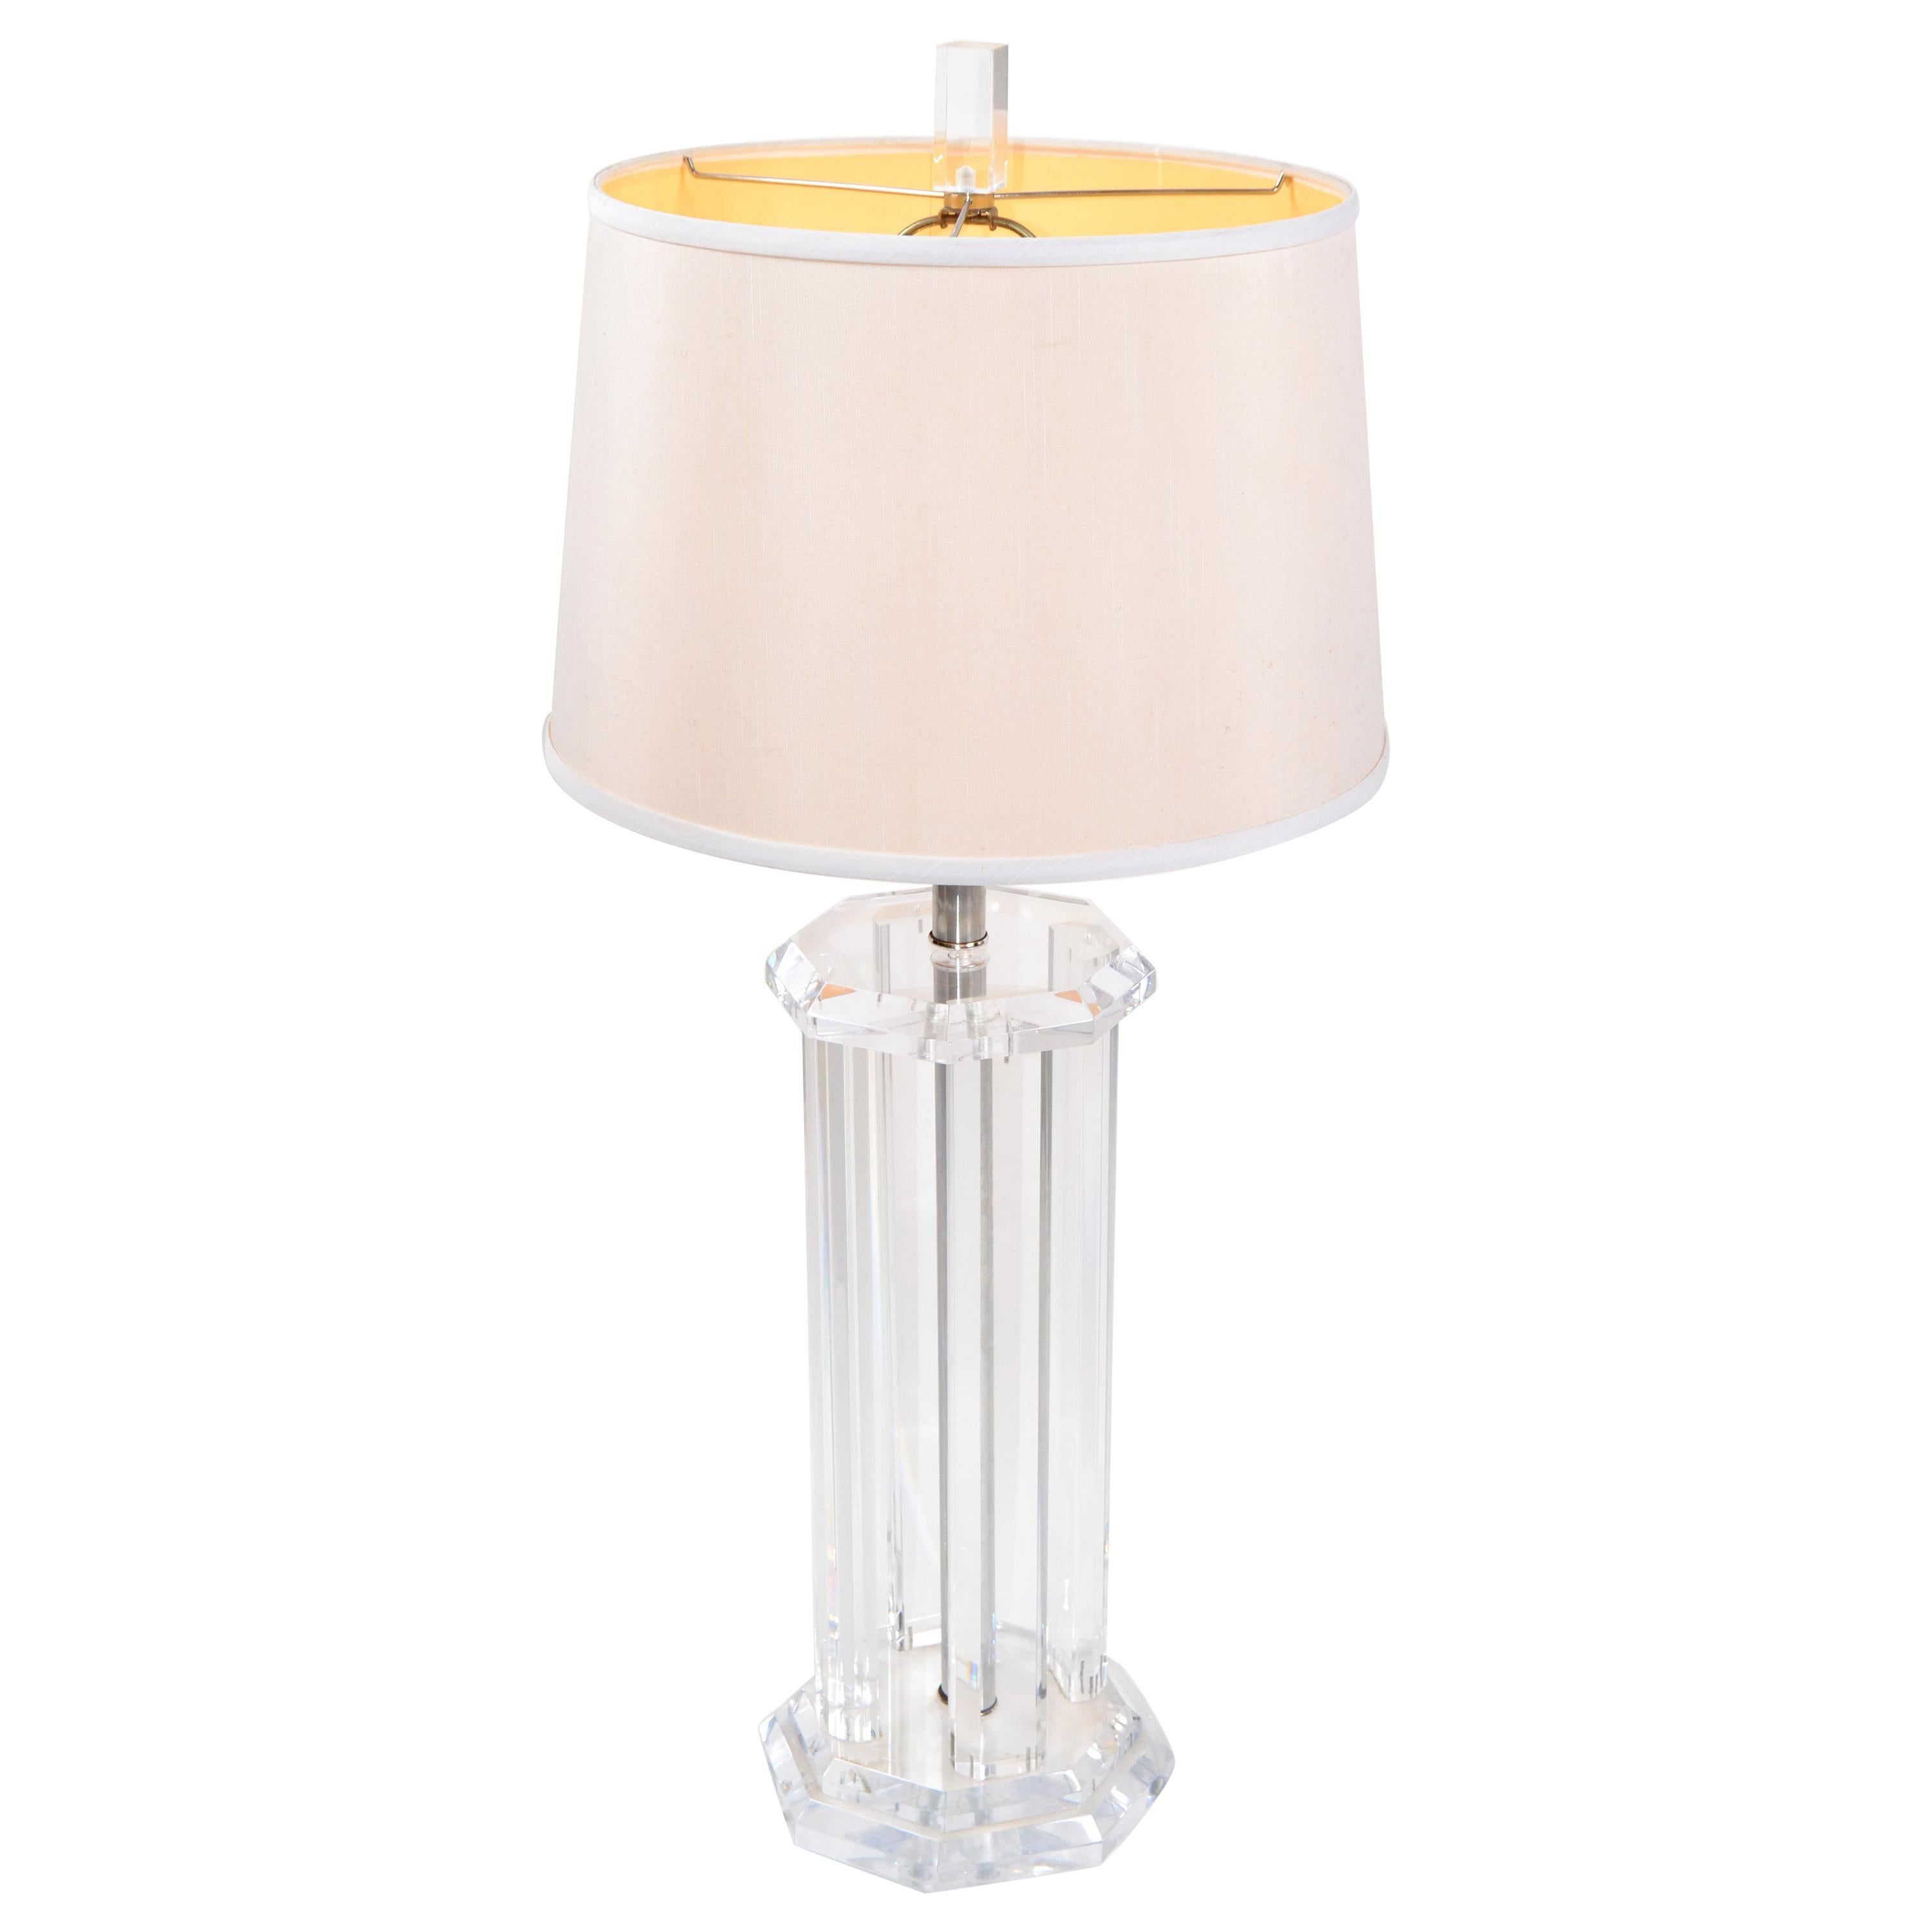 Chrome and Clear Lucite Mid-Century Modern Octagonal Table Lamp, 1970s For Sale